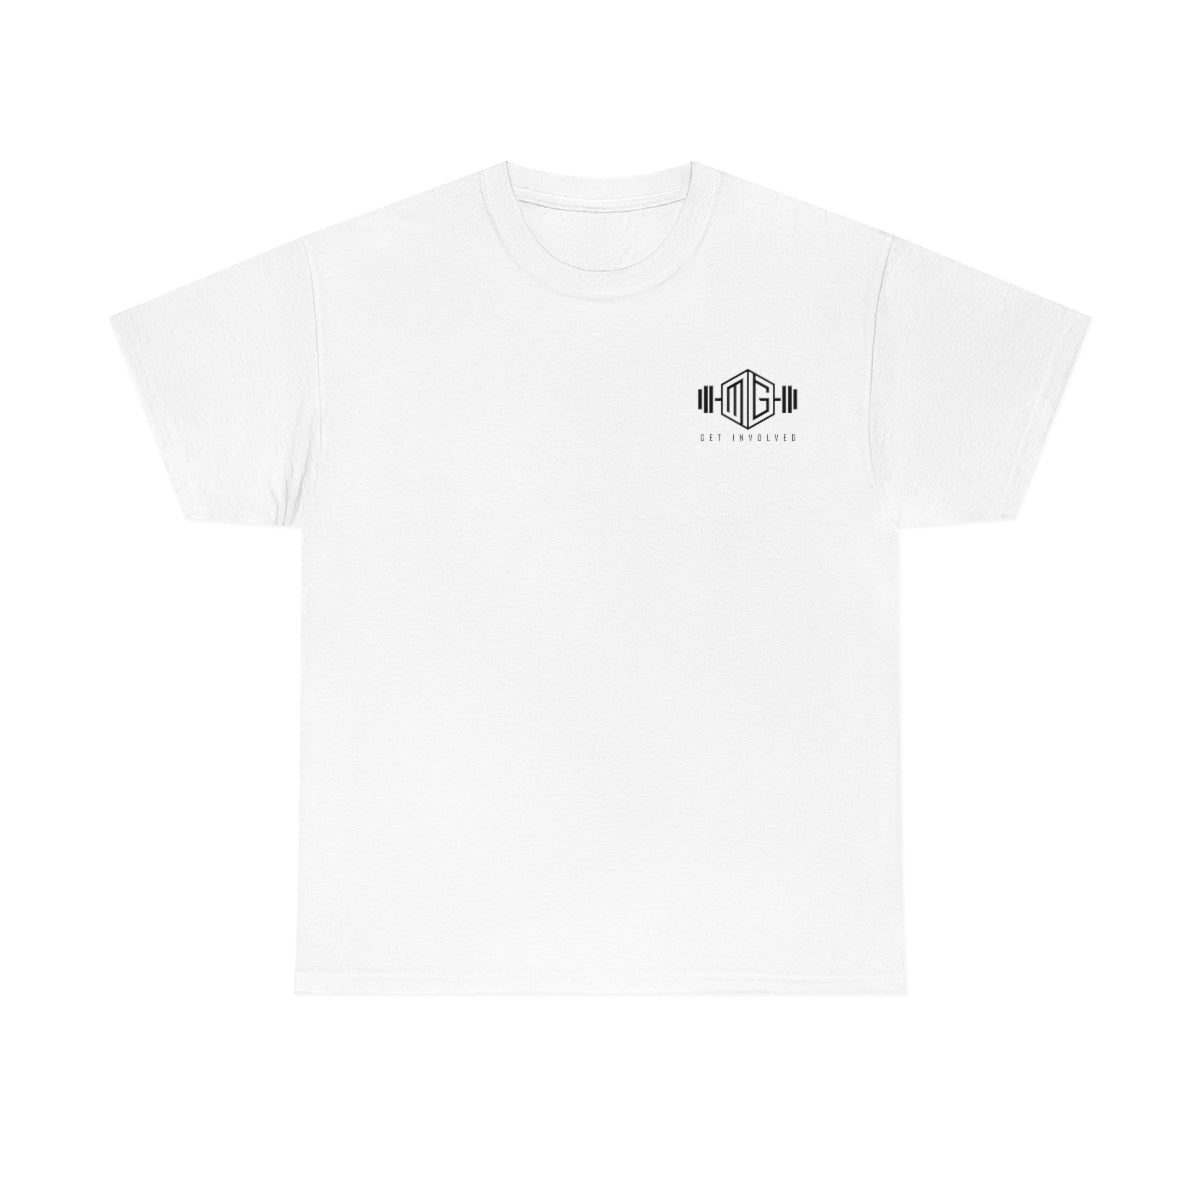 Michael Glynos "MG" Double Sided Tee